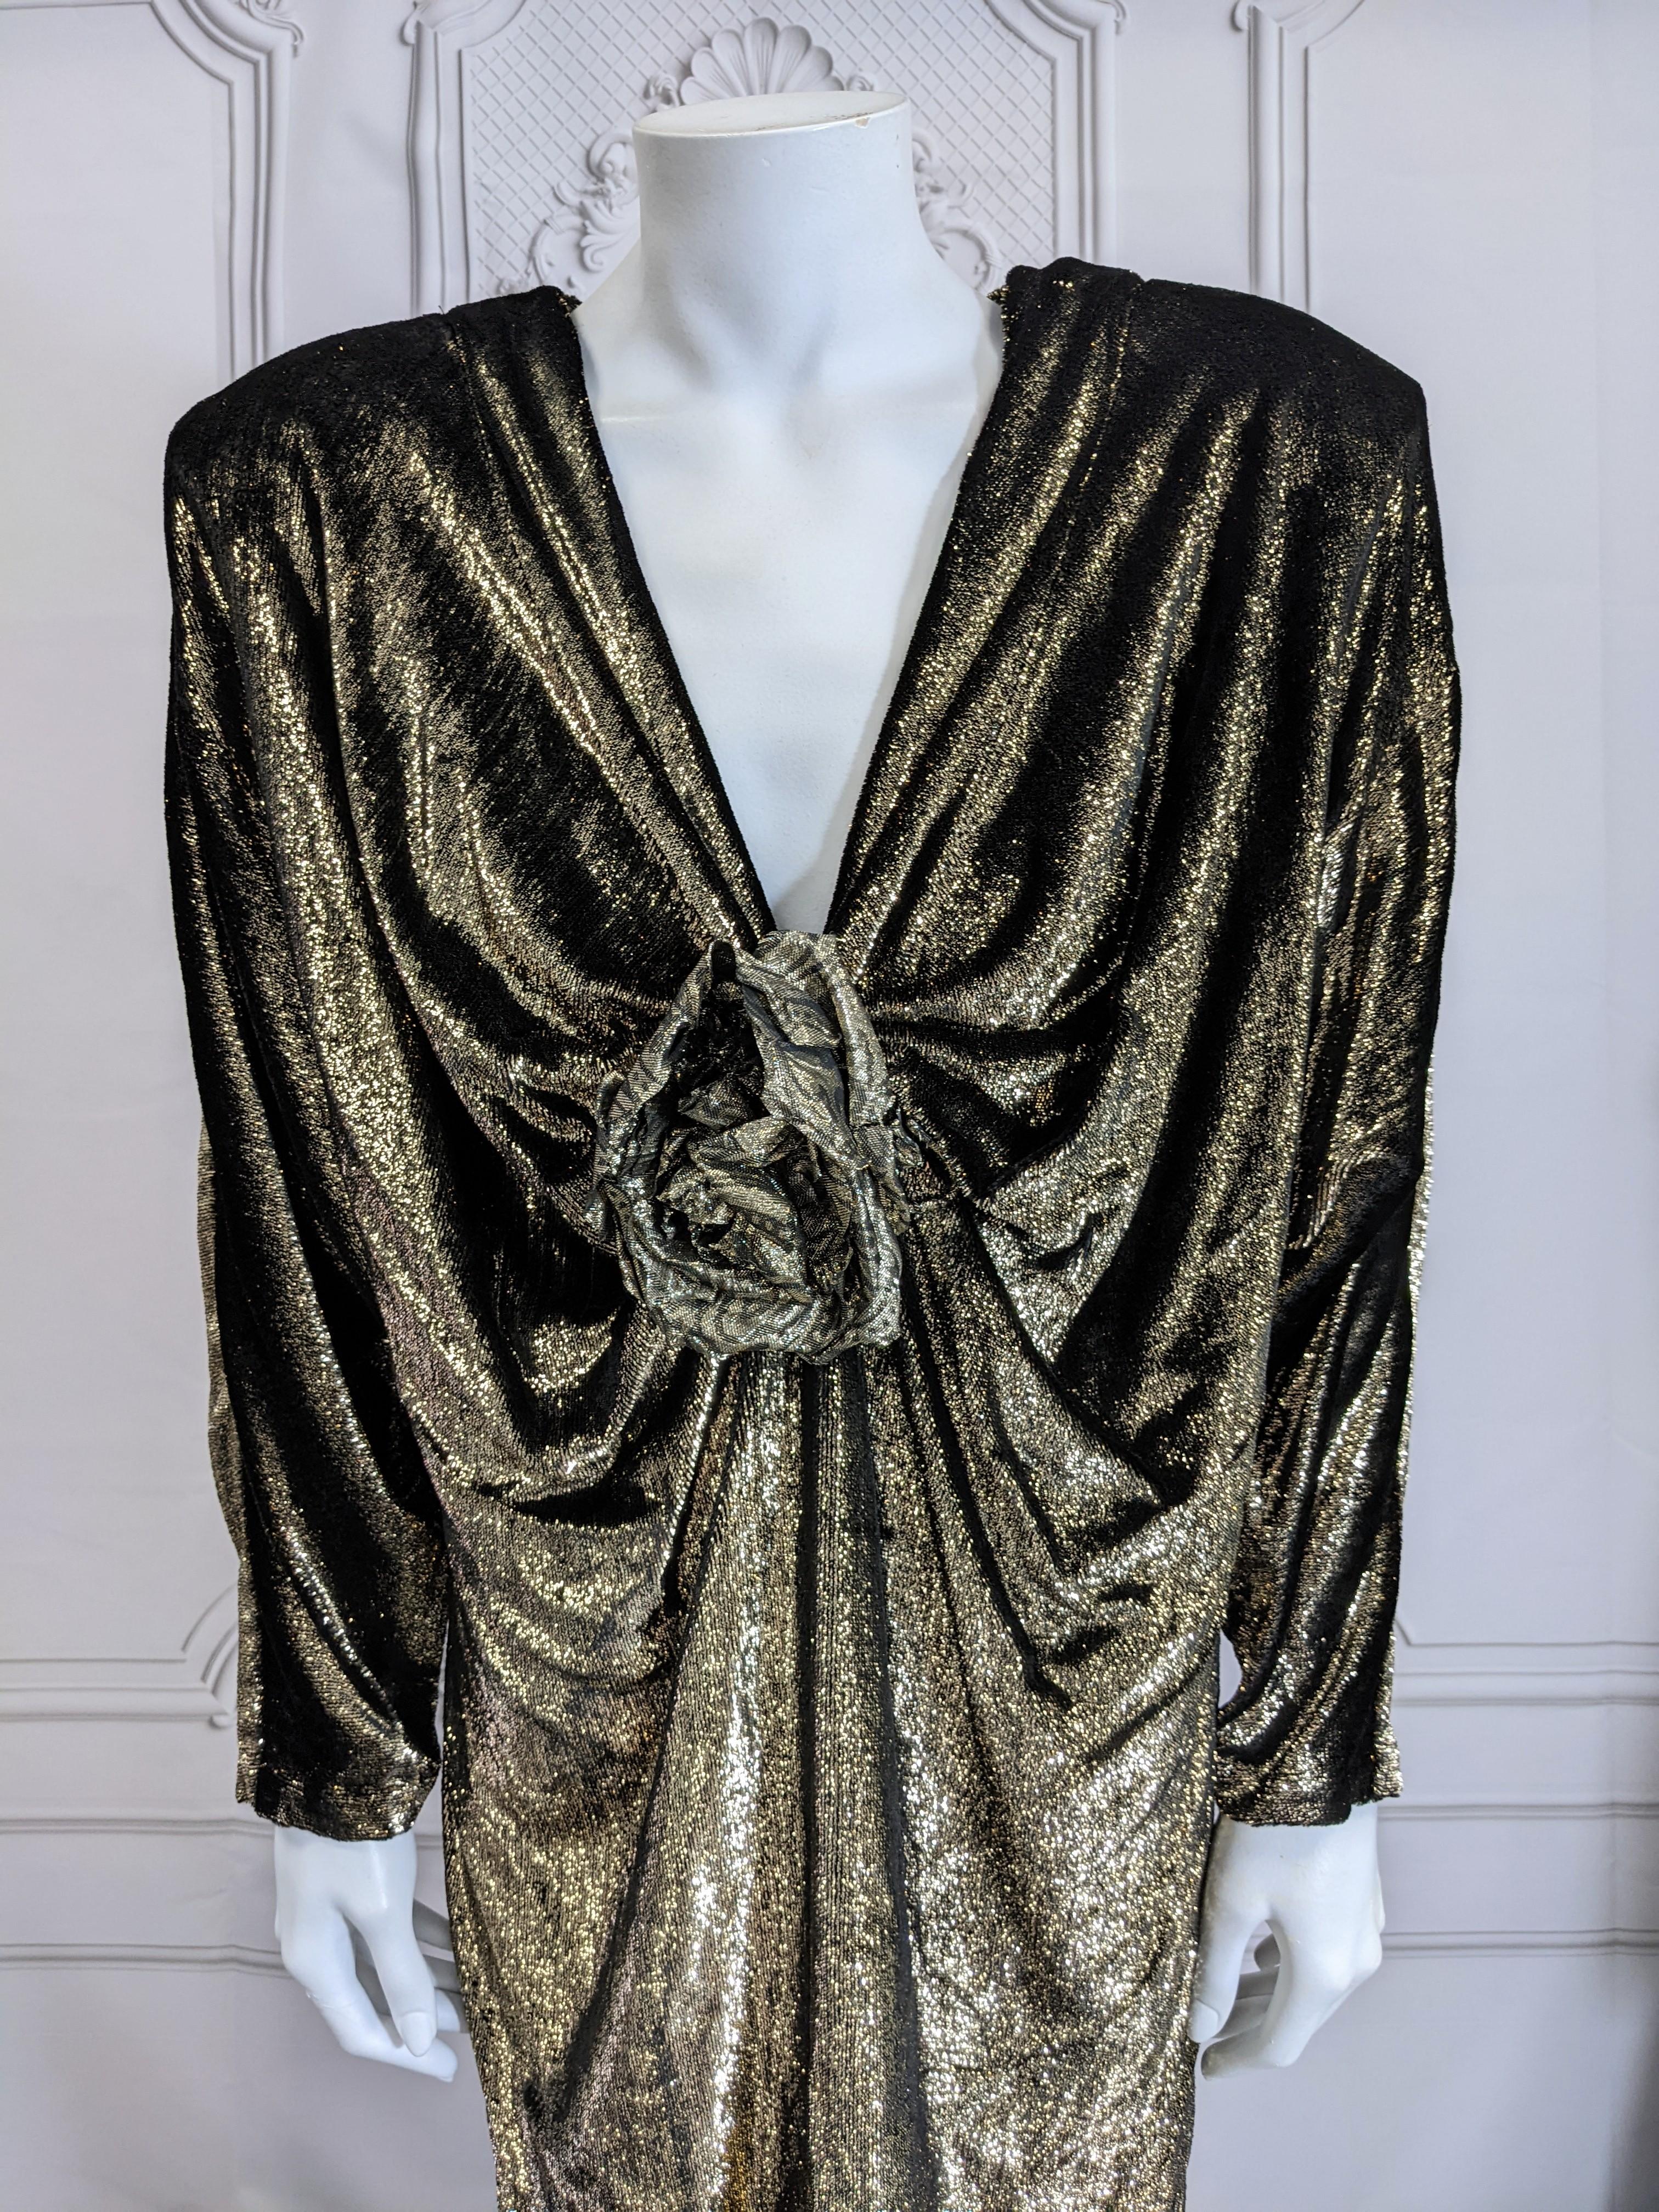 Genny by Gianni Versace Draped Lurex Velvet Dress In Good Condition For Sale In New York, NY